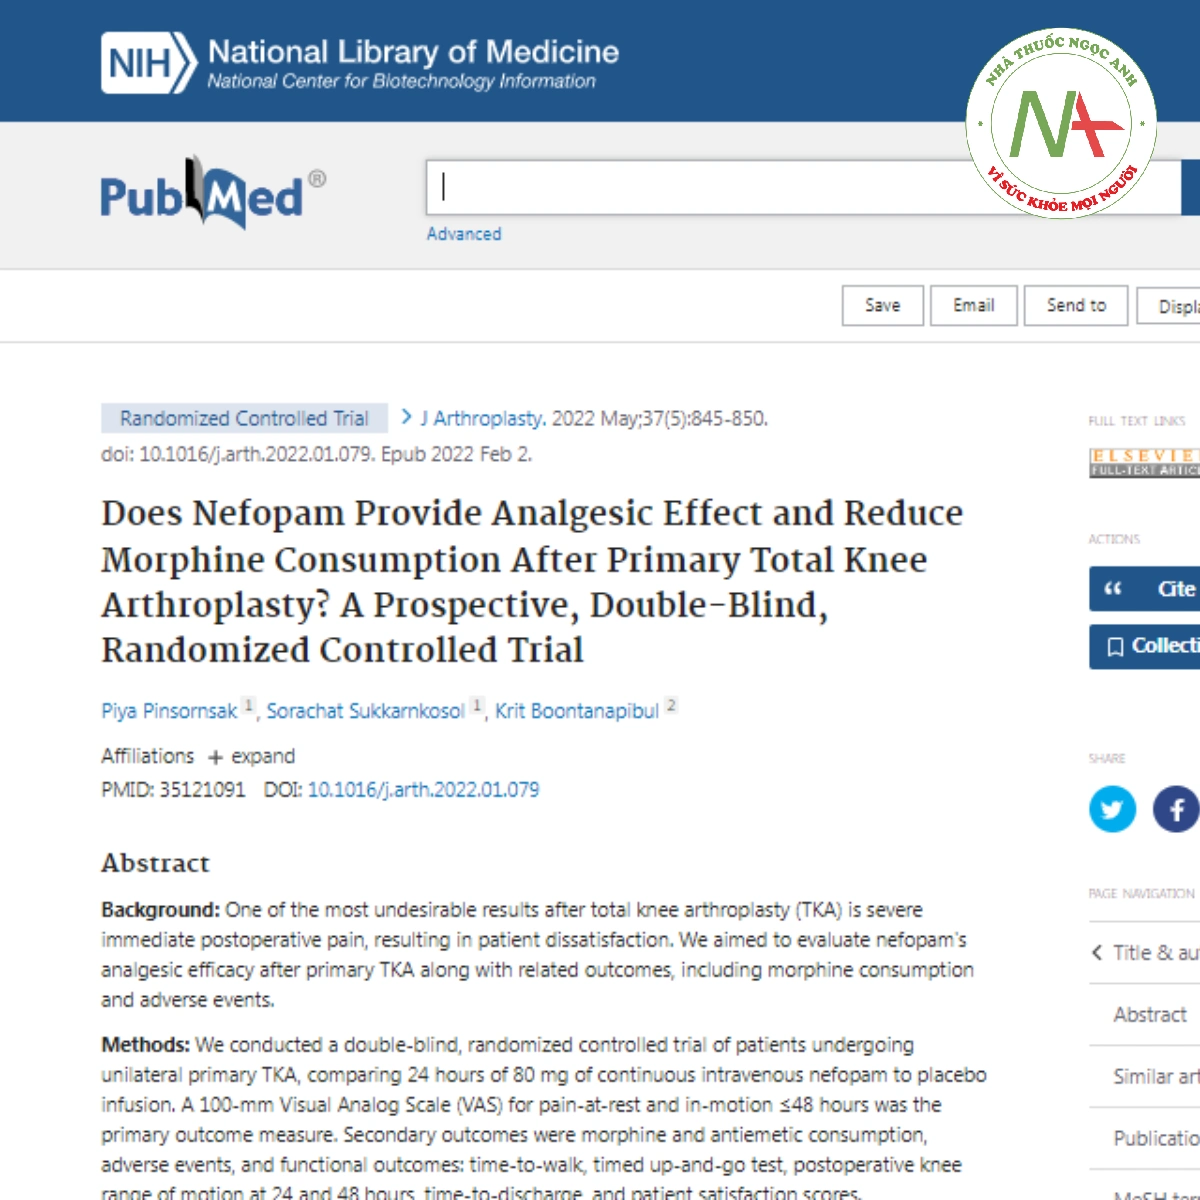 Does Nefopam Provide Analgesic Effect and Reduce Morphine Consumption After Primary Total Knee Arthroplasty_ A Prospective, Double-Blind, Randomized Controlled Trial